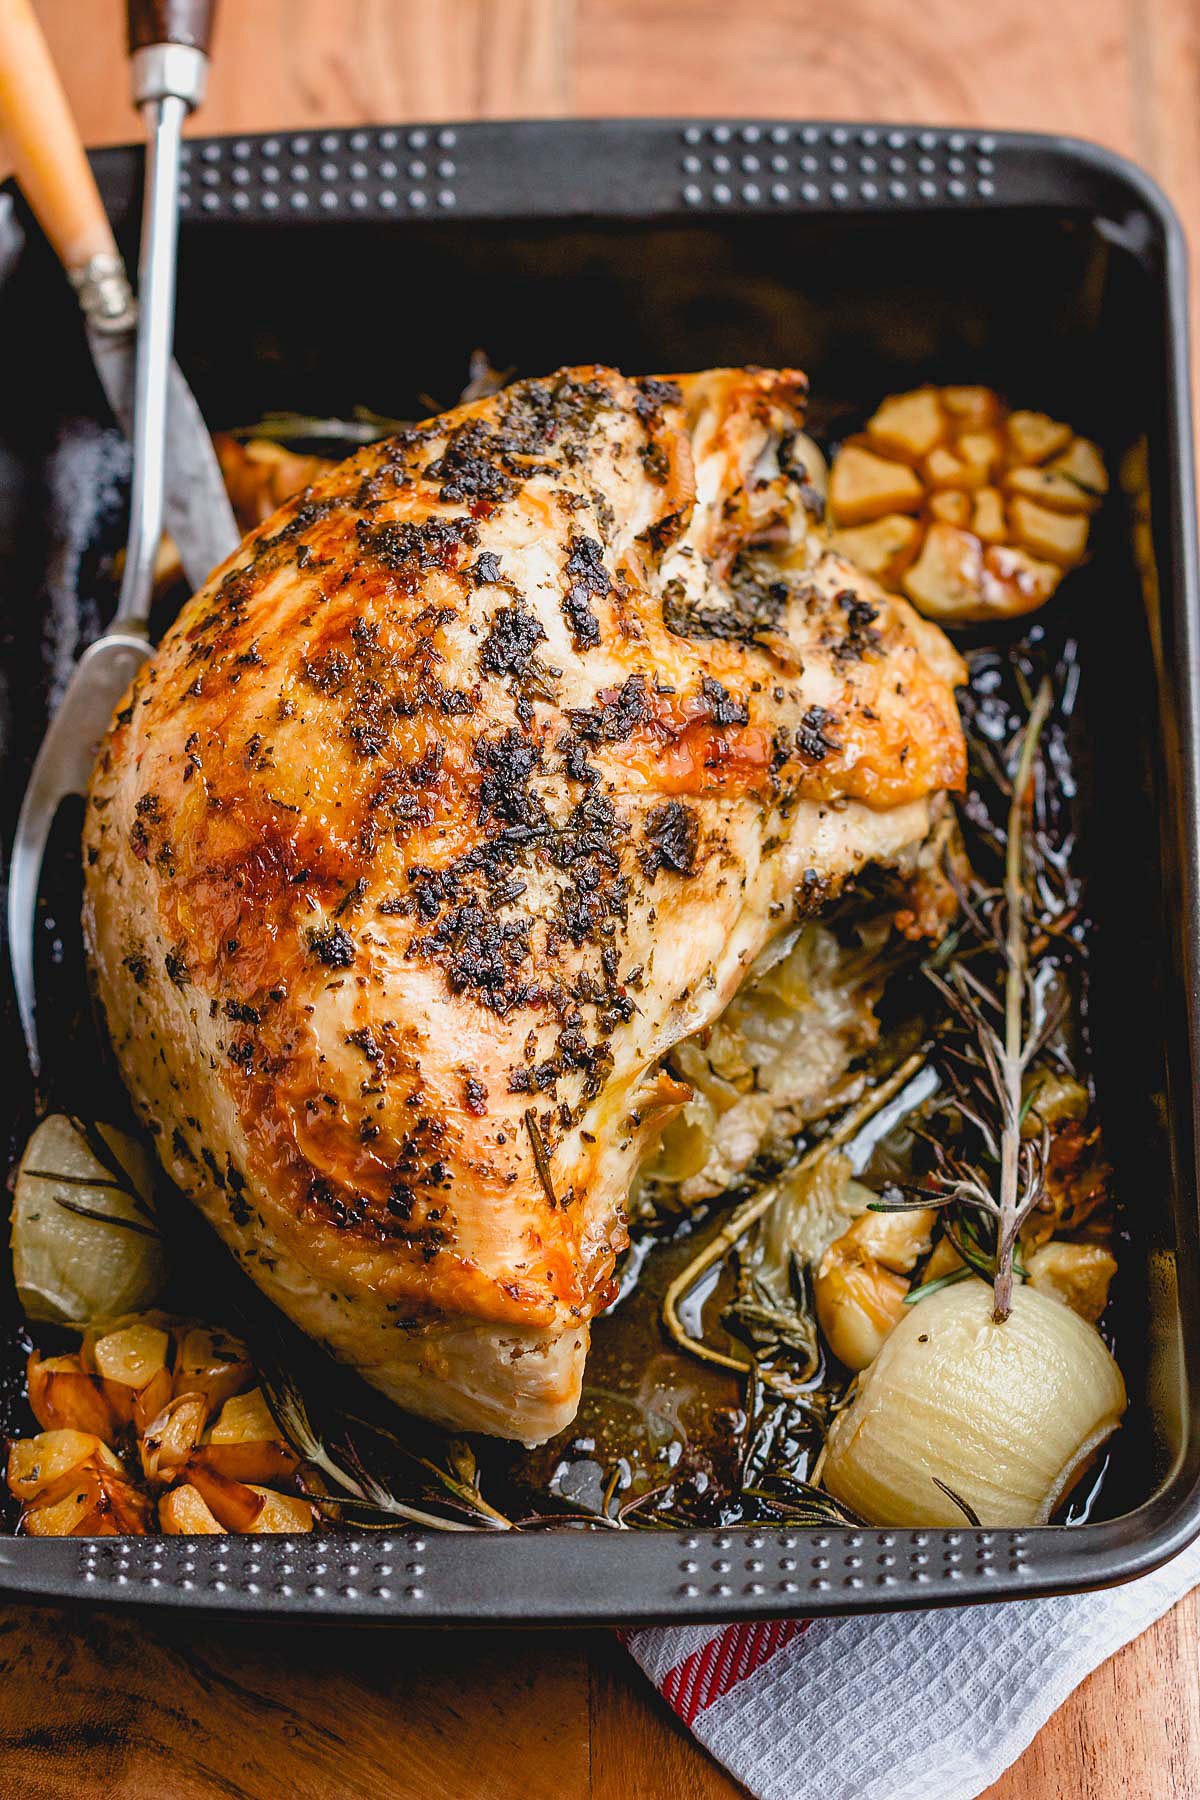 Turkey Breast Recipes For Thanksgiving
 Roasted Turkey Breast Recipe with Garlic Herb Butter